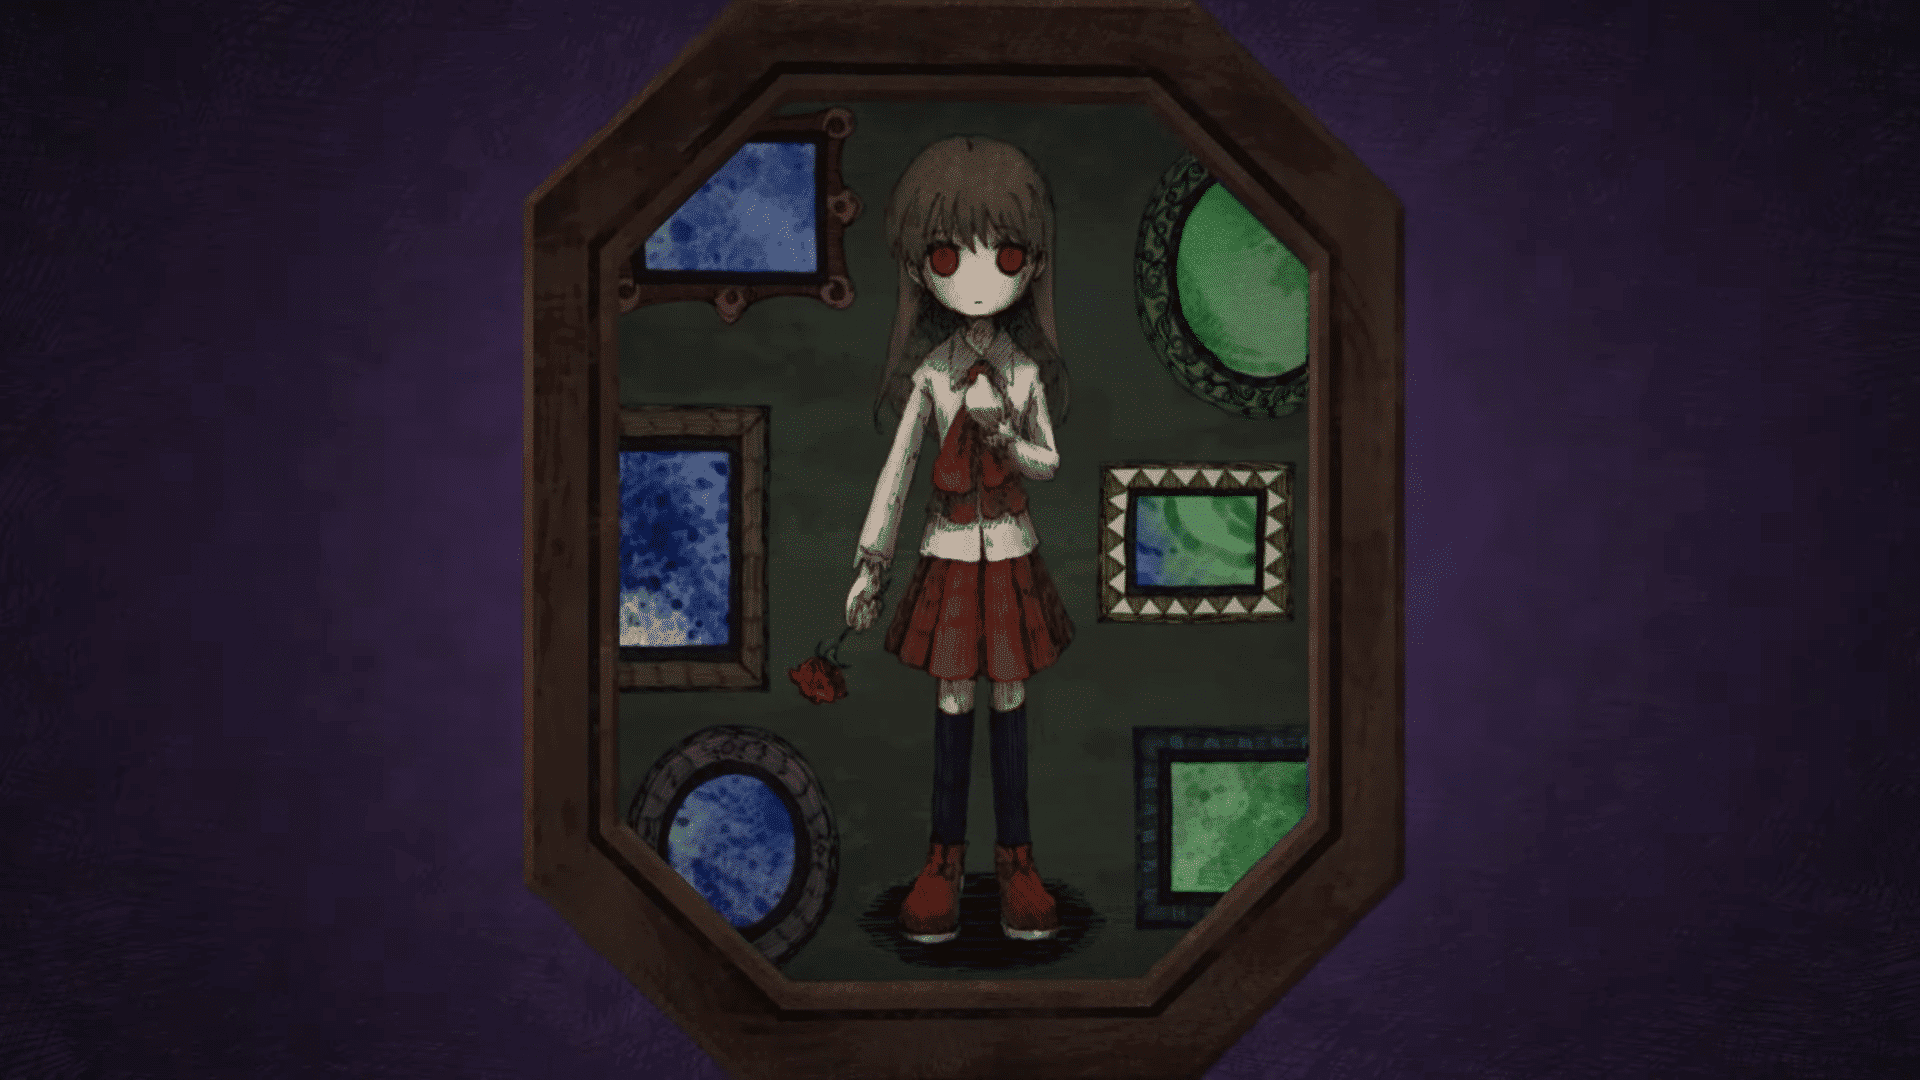 Classic RPG Maker Horror Title ‘Ib’ Launching for Switch March 2023